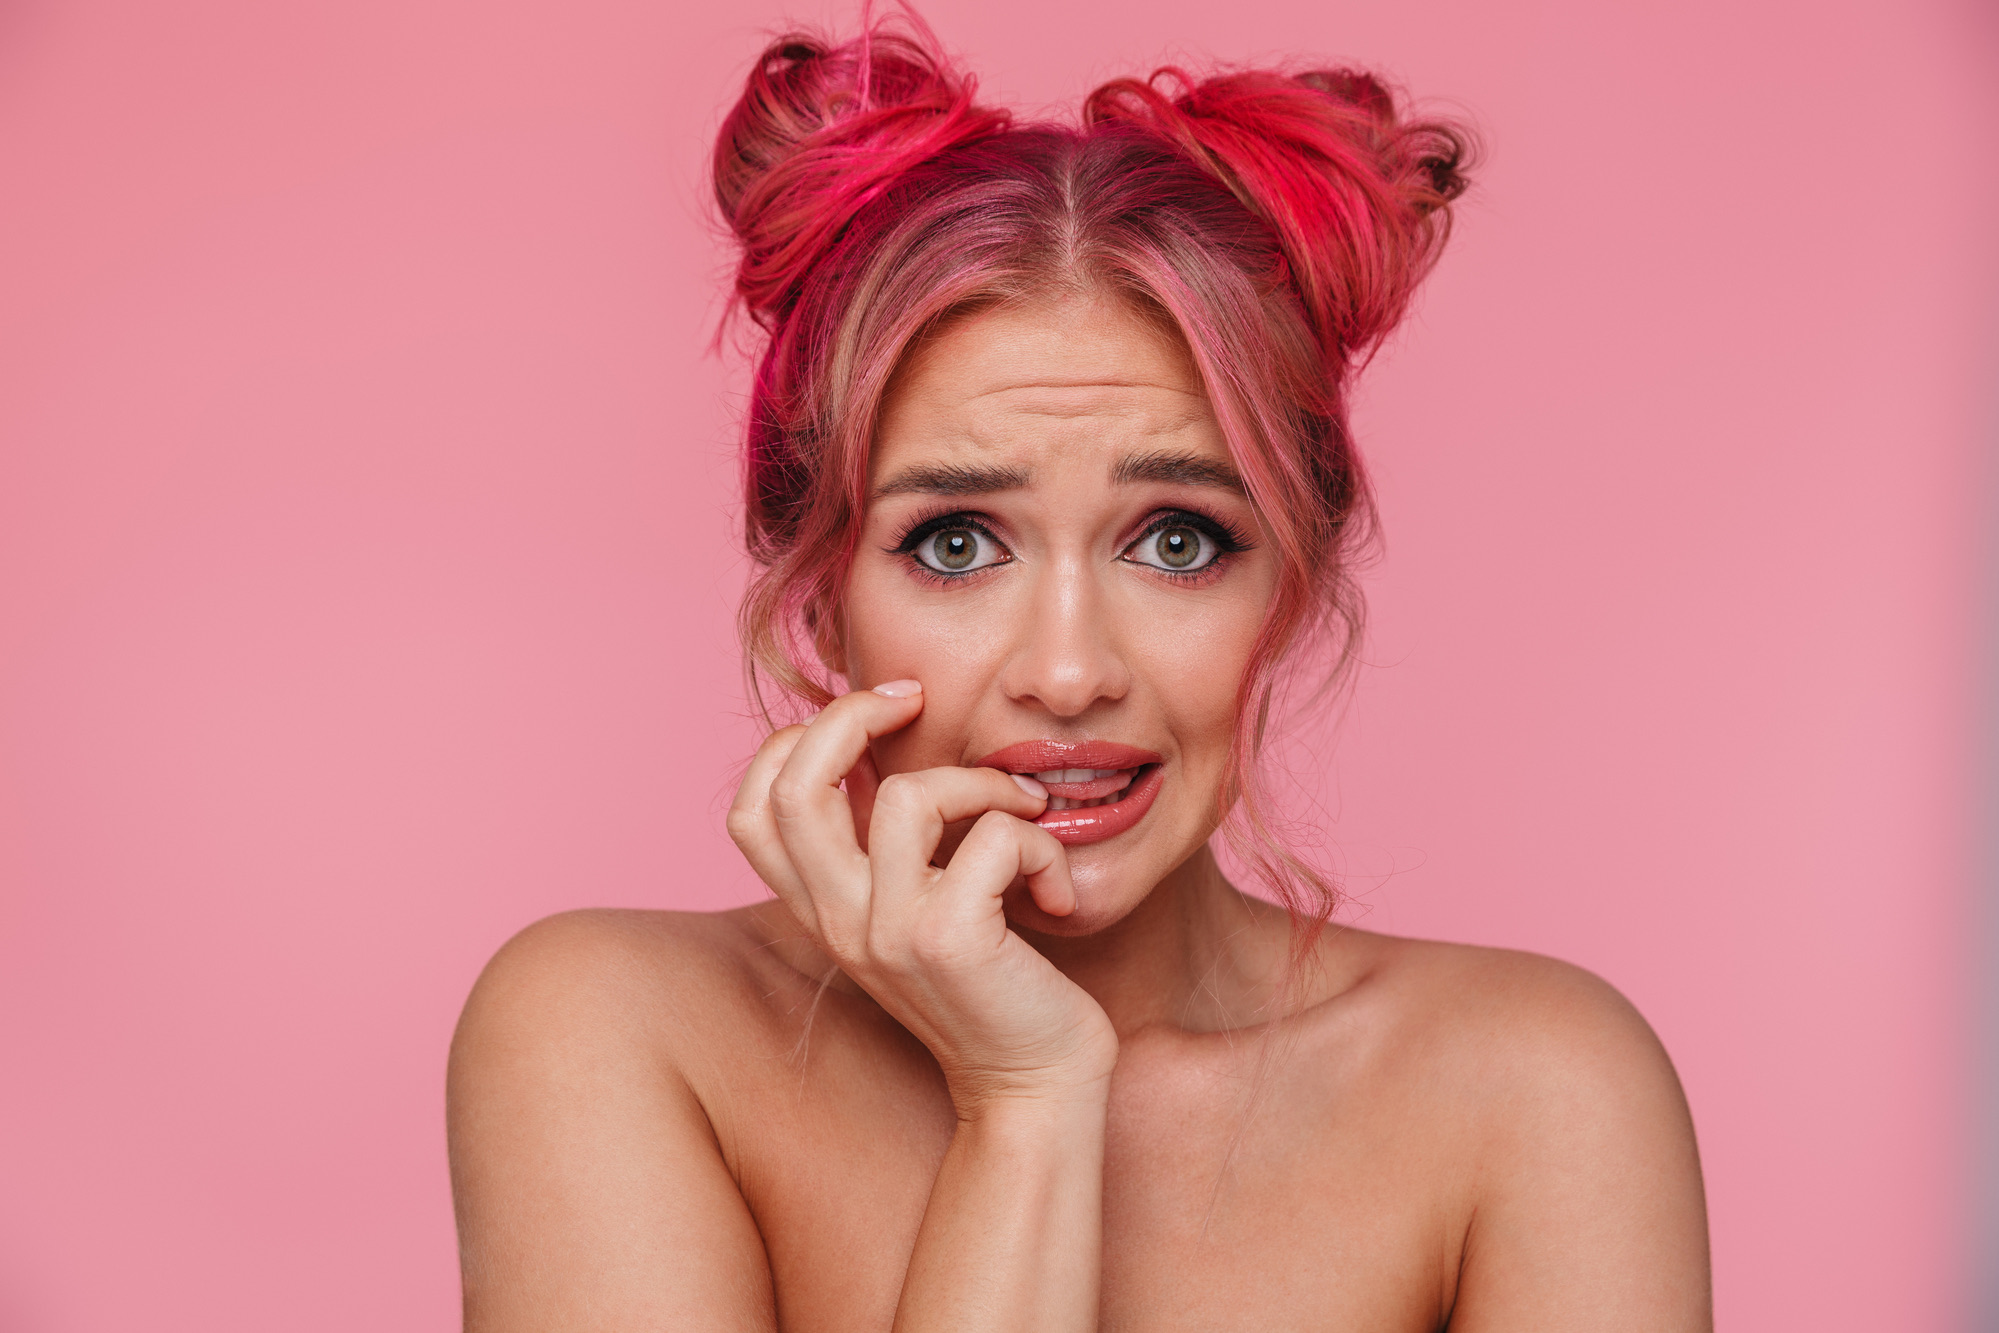 Portrait of uptight shirtless young woman with colorful hairstyle frowning and biting nails isolated over pink background